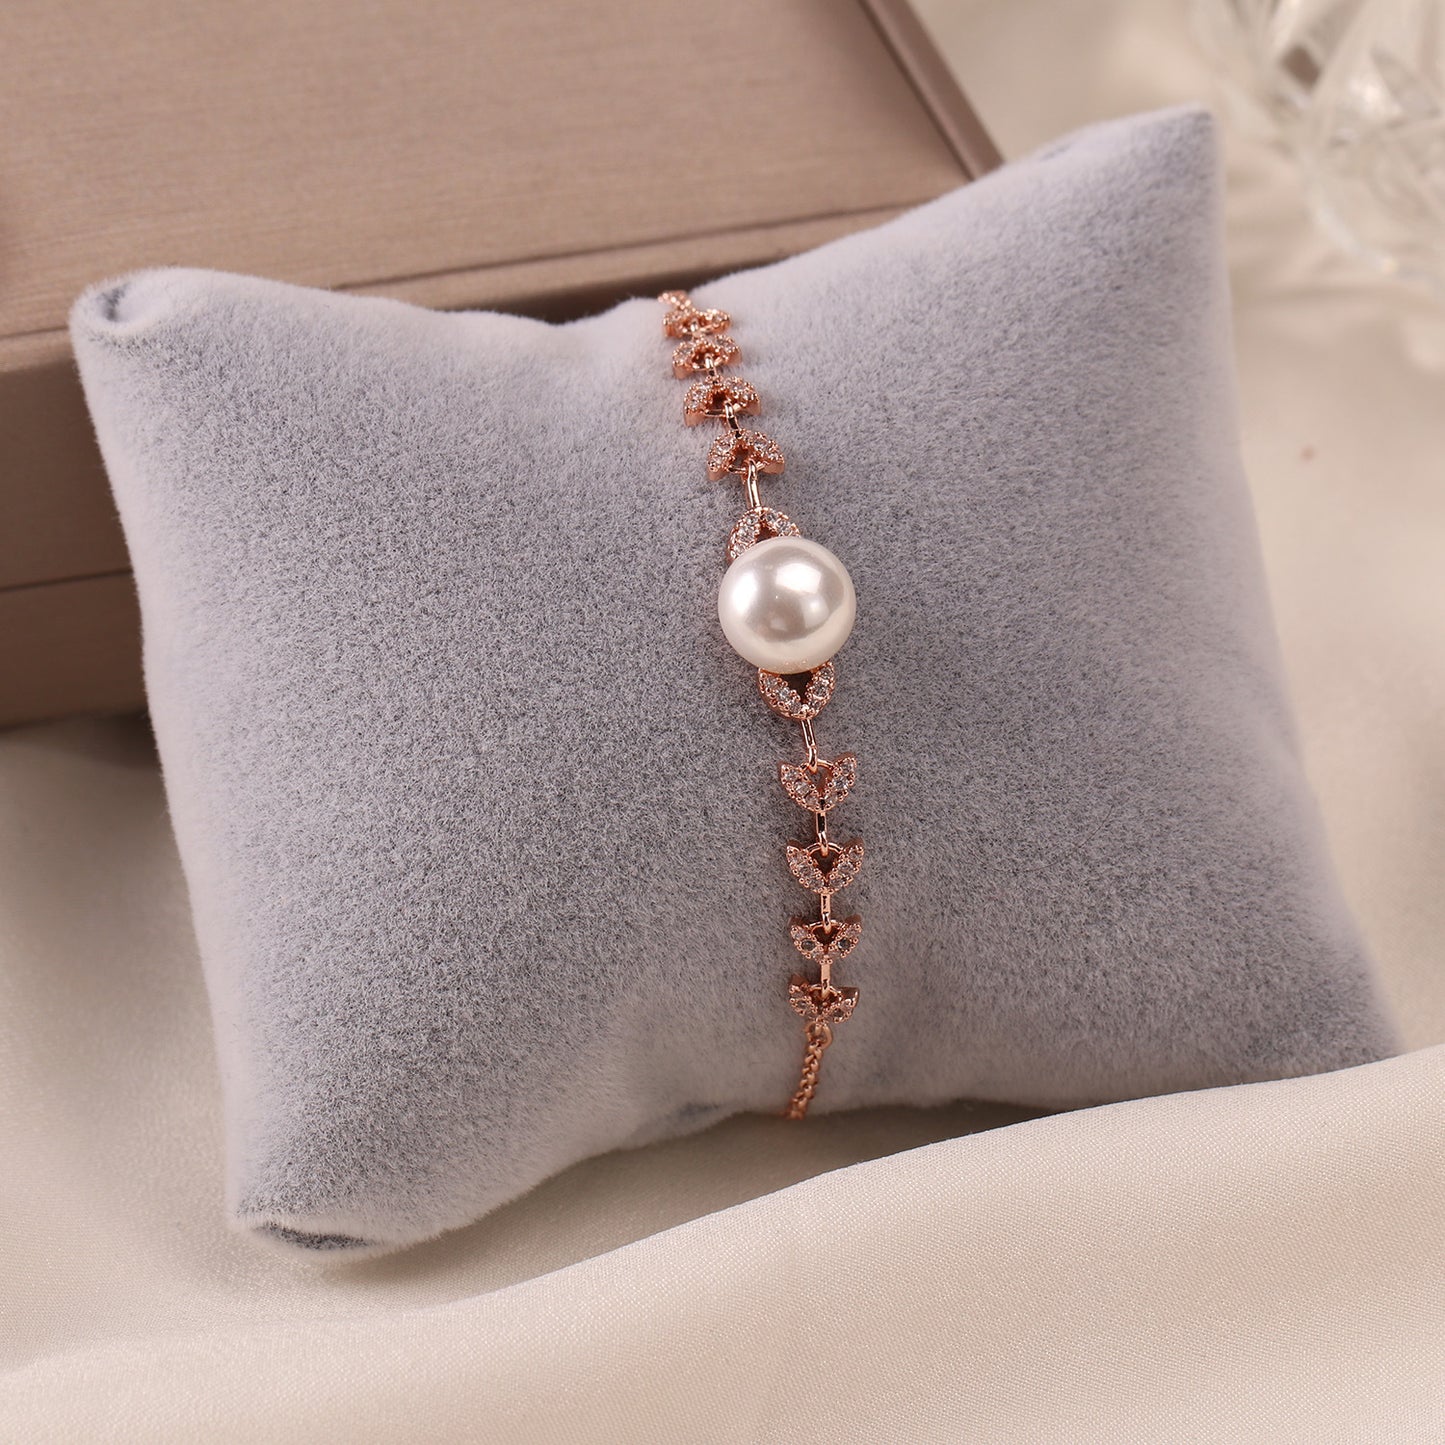 New Style Leaf Bead Copper Alloy Charm Bracelet With Freshwater Pearl Rose Gold-Plated Drawable Bracelet For Gift